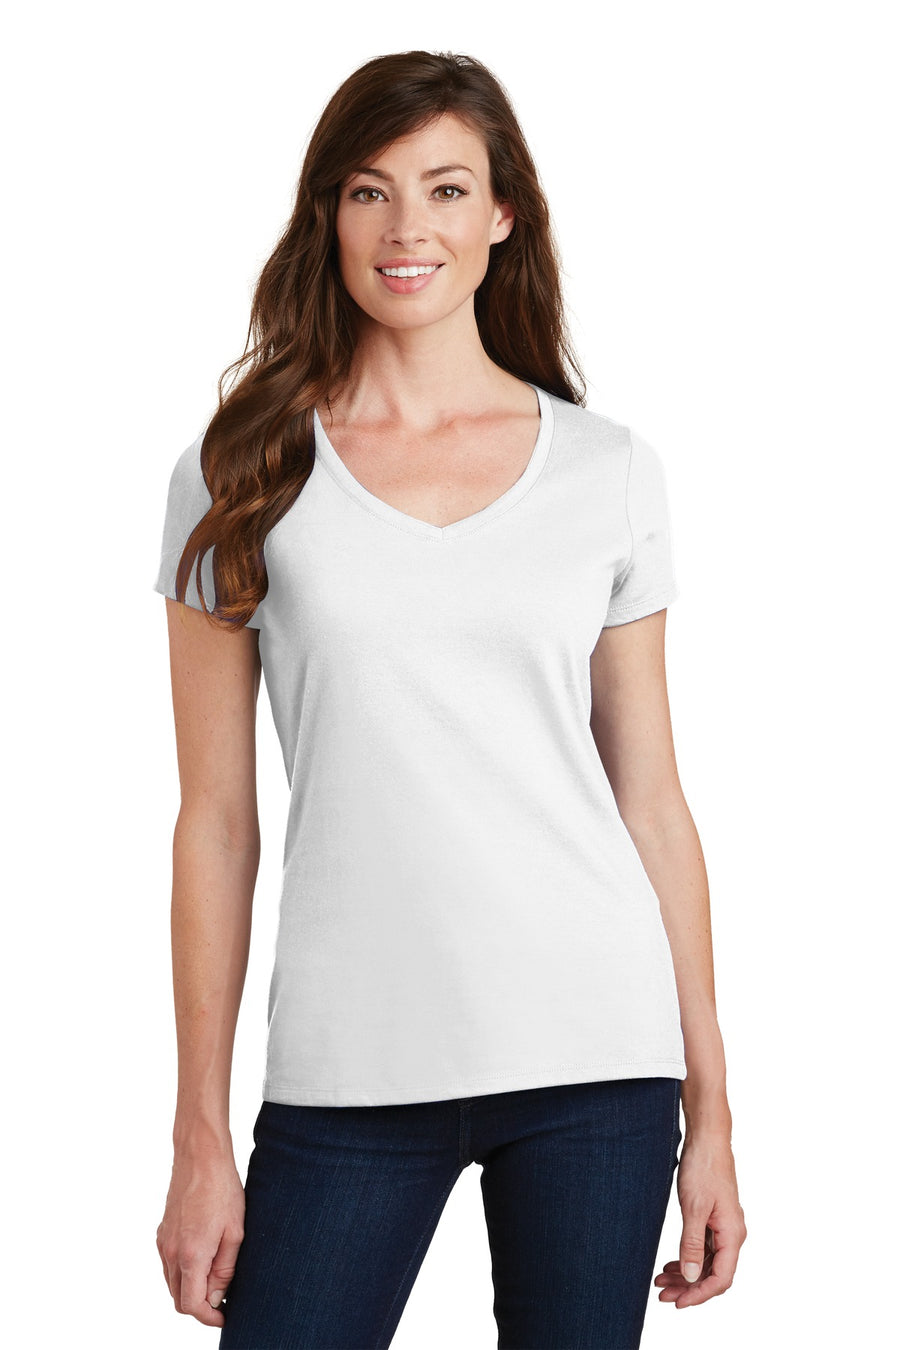 Marylin Ave 2022-23 Spirit Wear On- Demand-Port and Co Ladies V-Neck